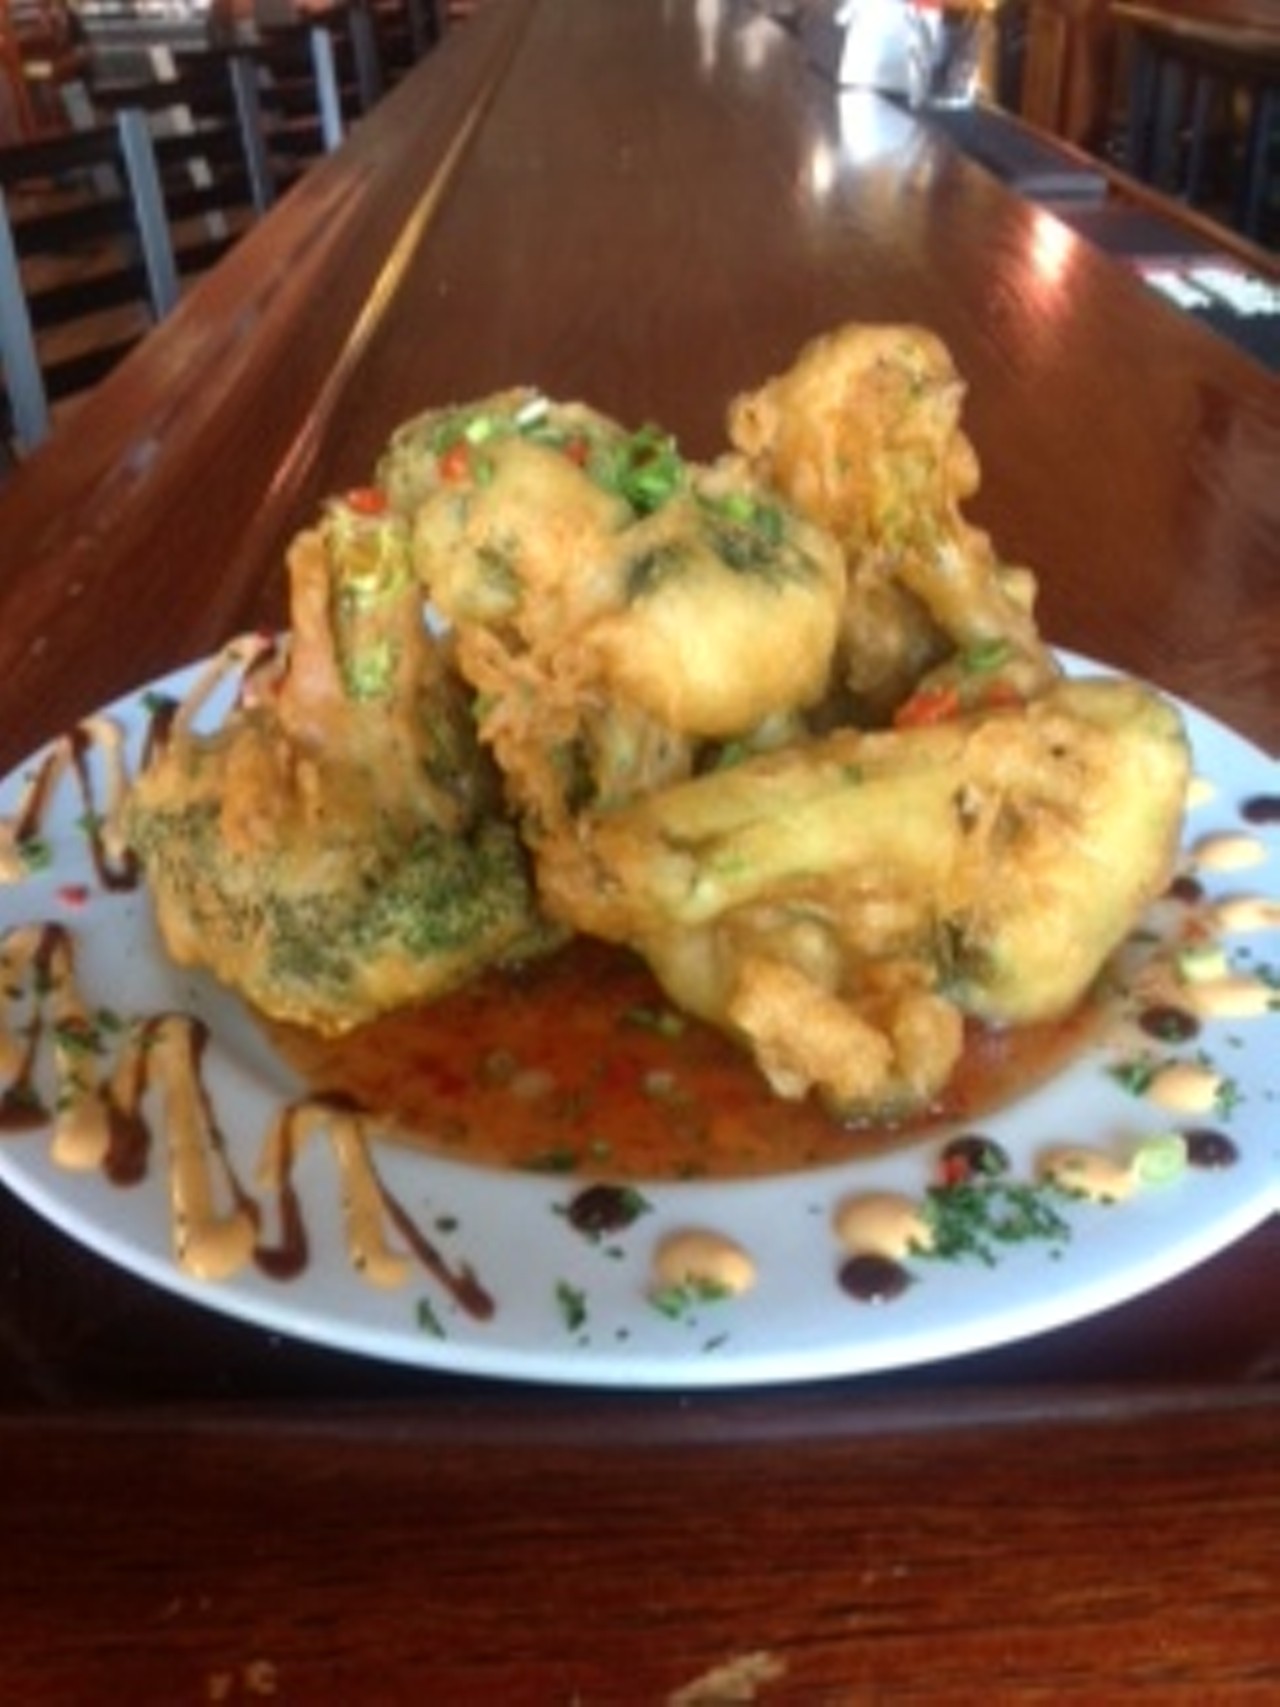 Who doesn't love fried vegetables? Throw some Sriracha in the mix and you have a veggie nirvana. The broccoli tempura at XYZ the Tavern is not to be missed for hot sauce fans. The lightly battered and fried veg is then served with a zesty Sriracha aioli. XYZ the Tavern is located at 6419 Detroit Ave. Call 216-706-1104 or visit xyzthetavern.com for more information.